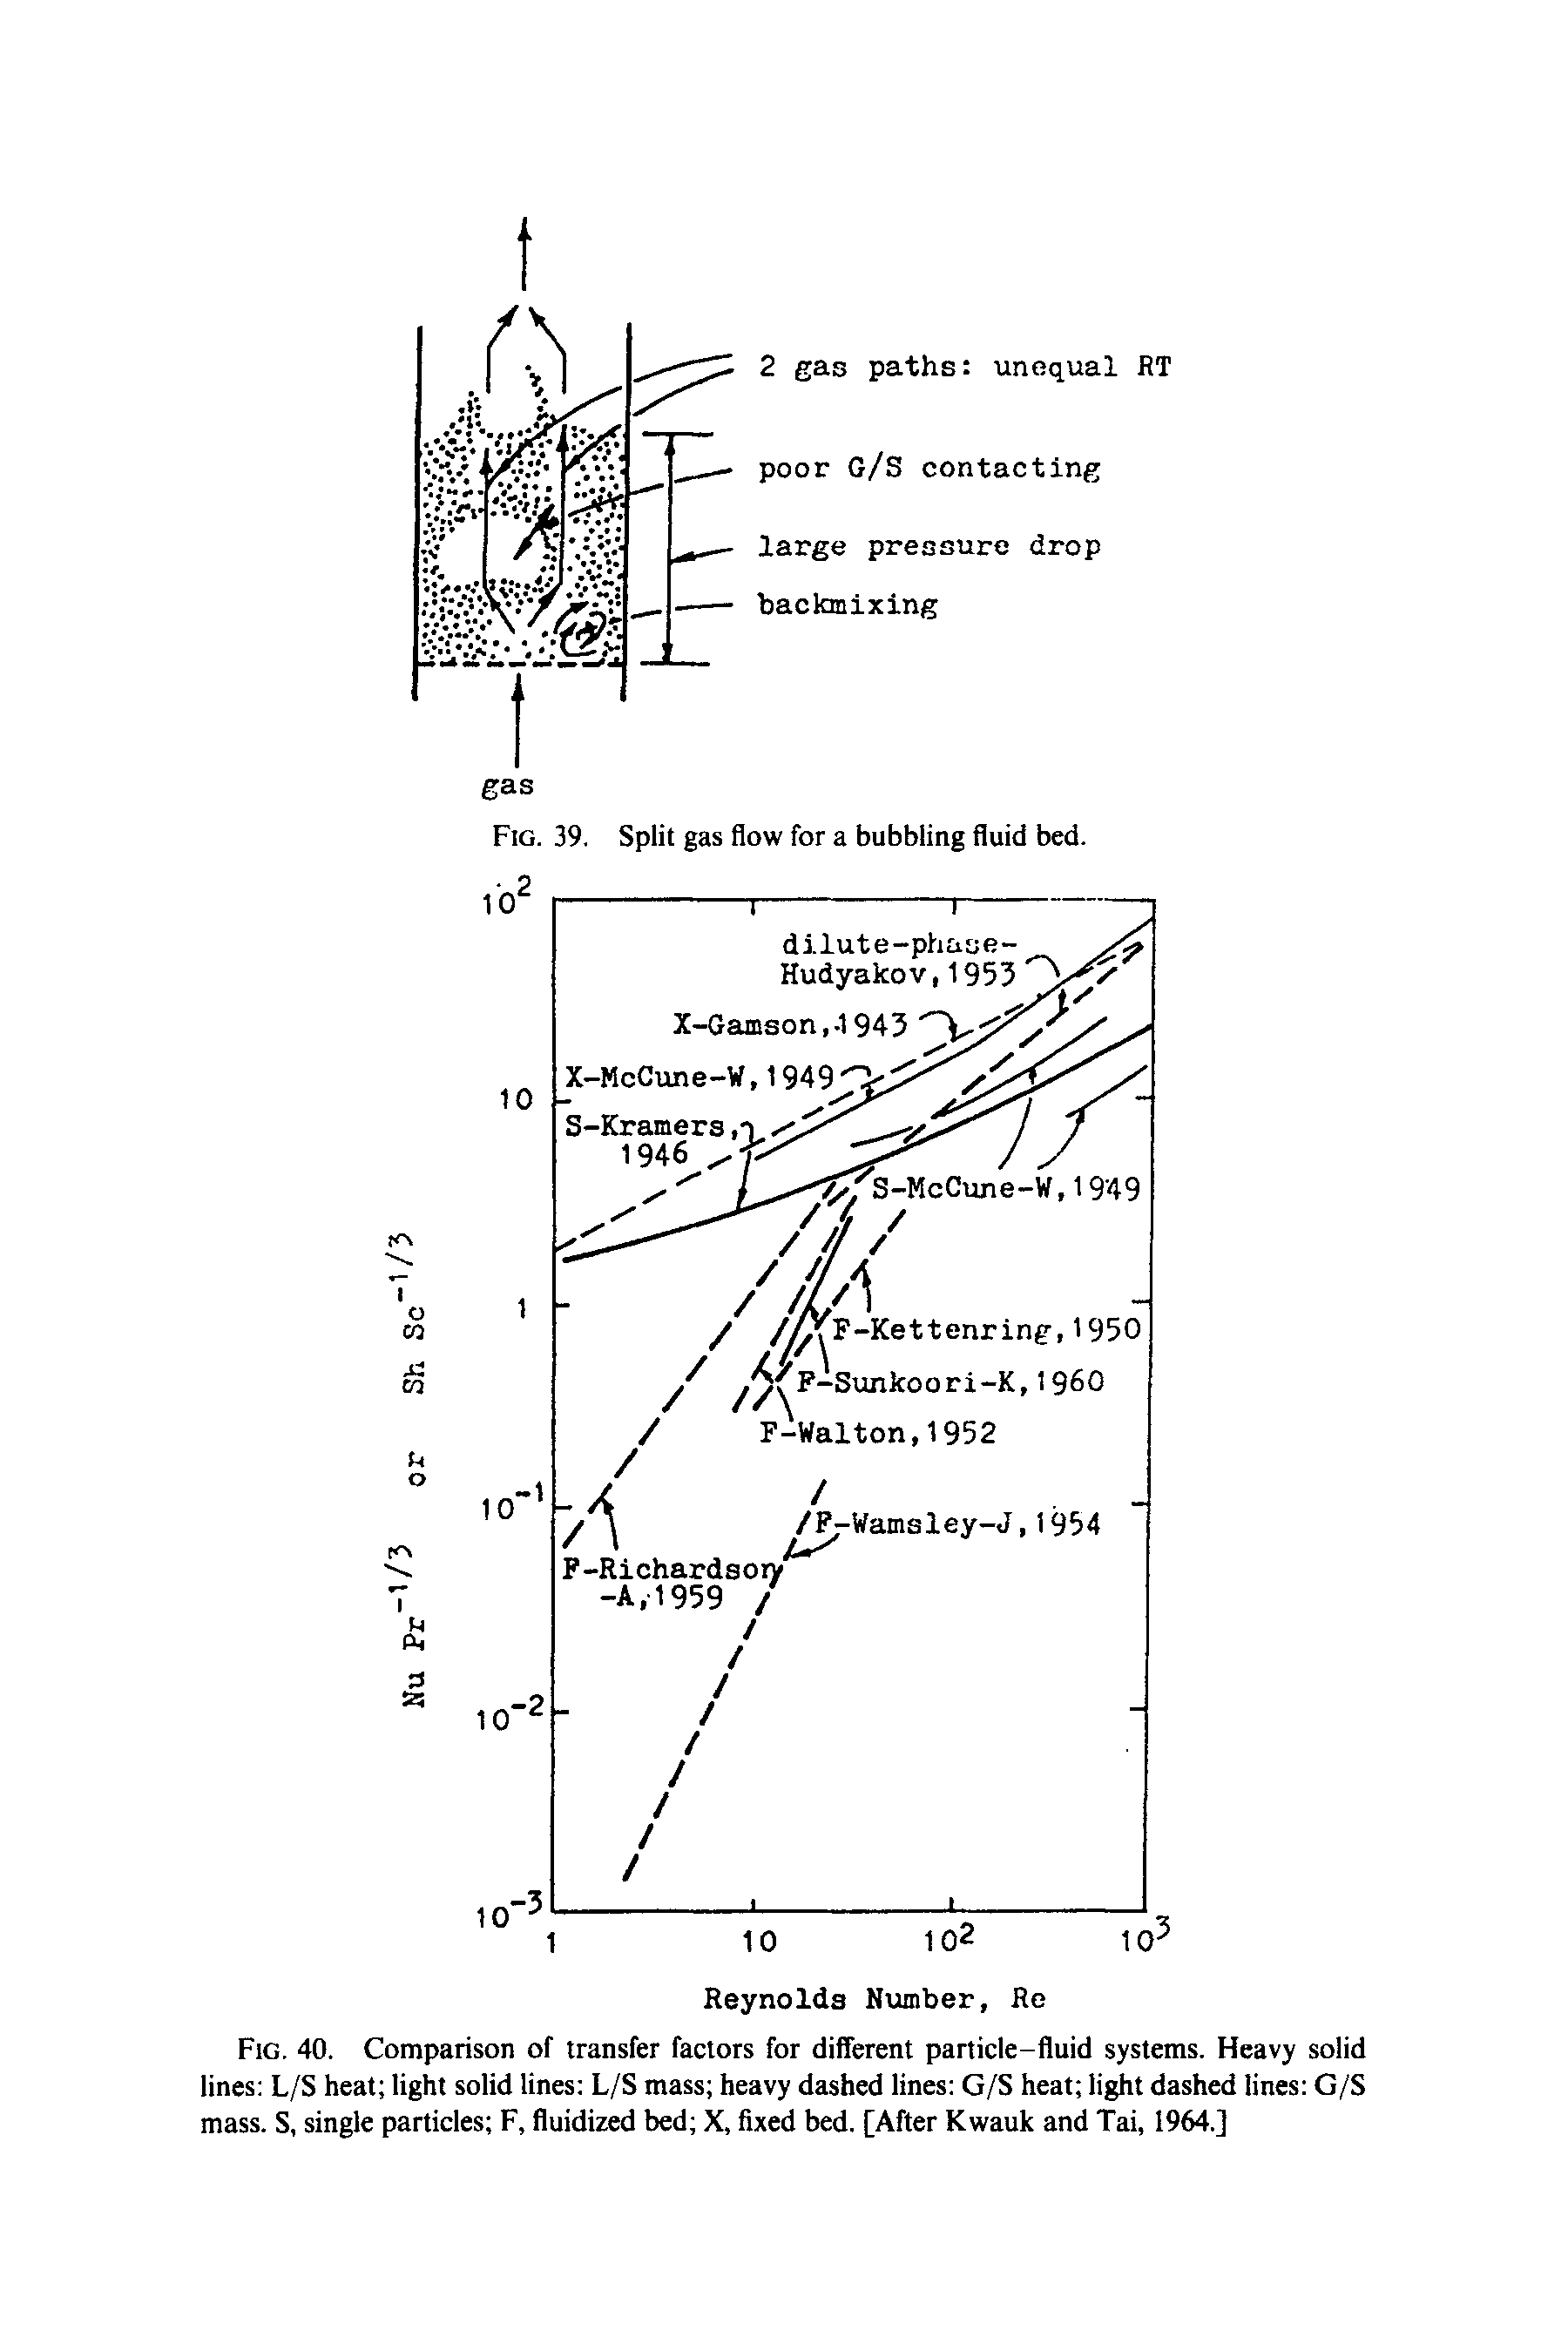 Fig. 40. Comparison of transfer factors for different particle-fluid systems. Heavy solid lines L/S heat light solid lines L/S mass heavy dashed lines G/S heat light dashed lines G/S mass. S, single particles F, fluidized bed X, fixed bed. [After Kwauk and Tai, 1964.]...